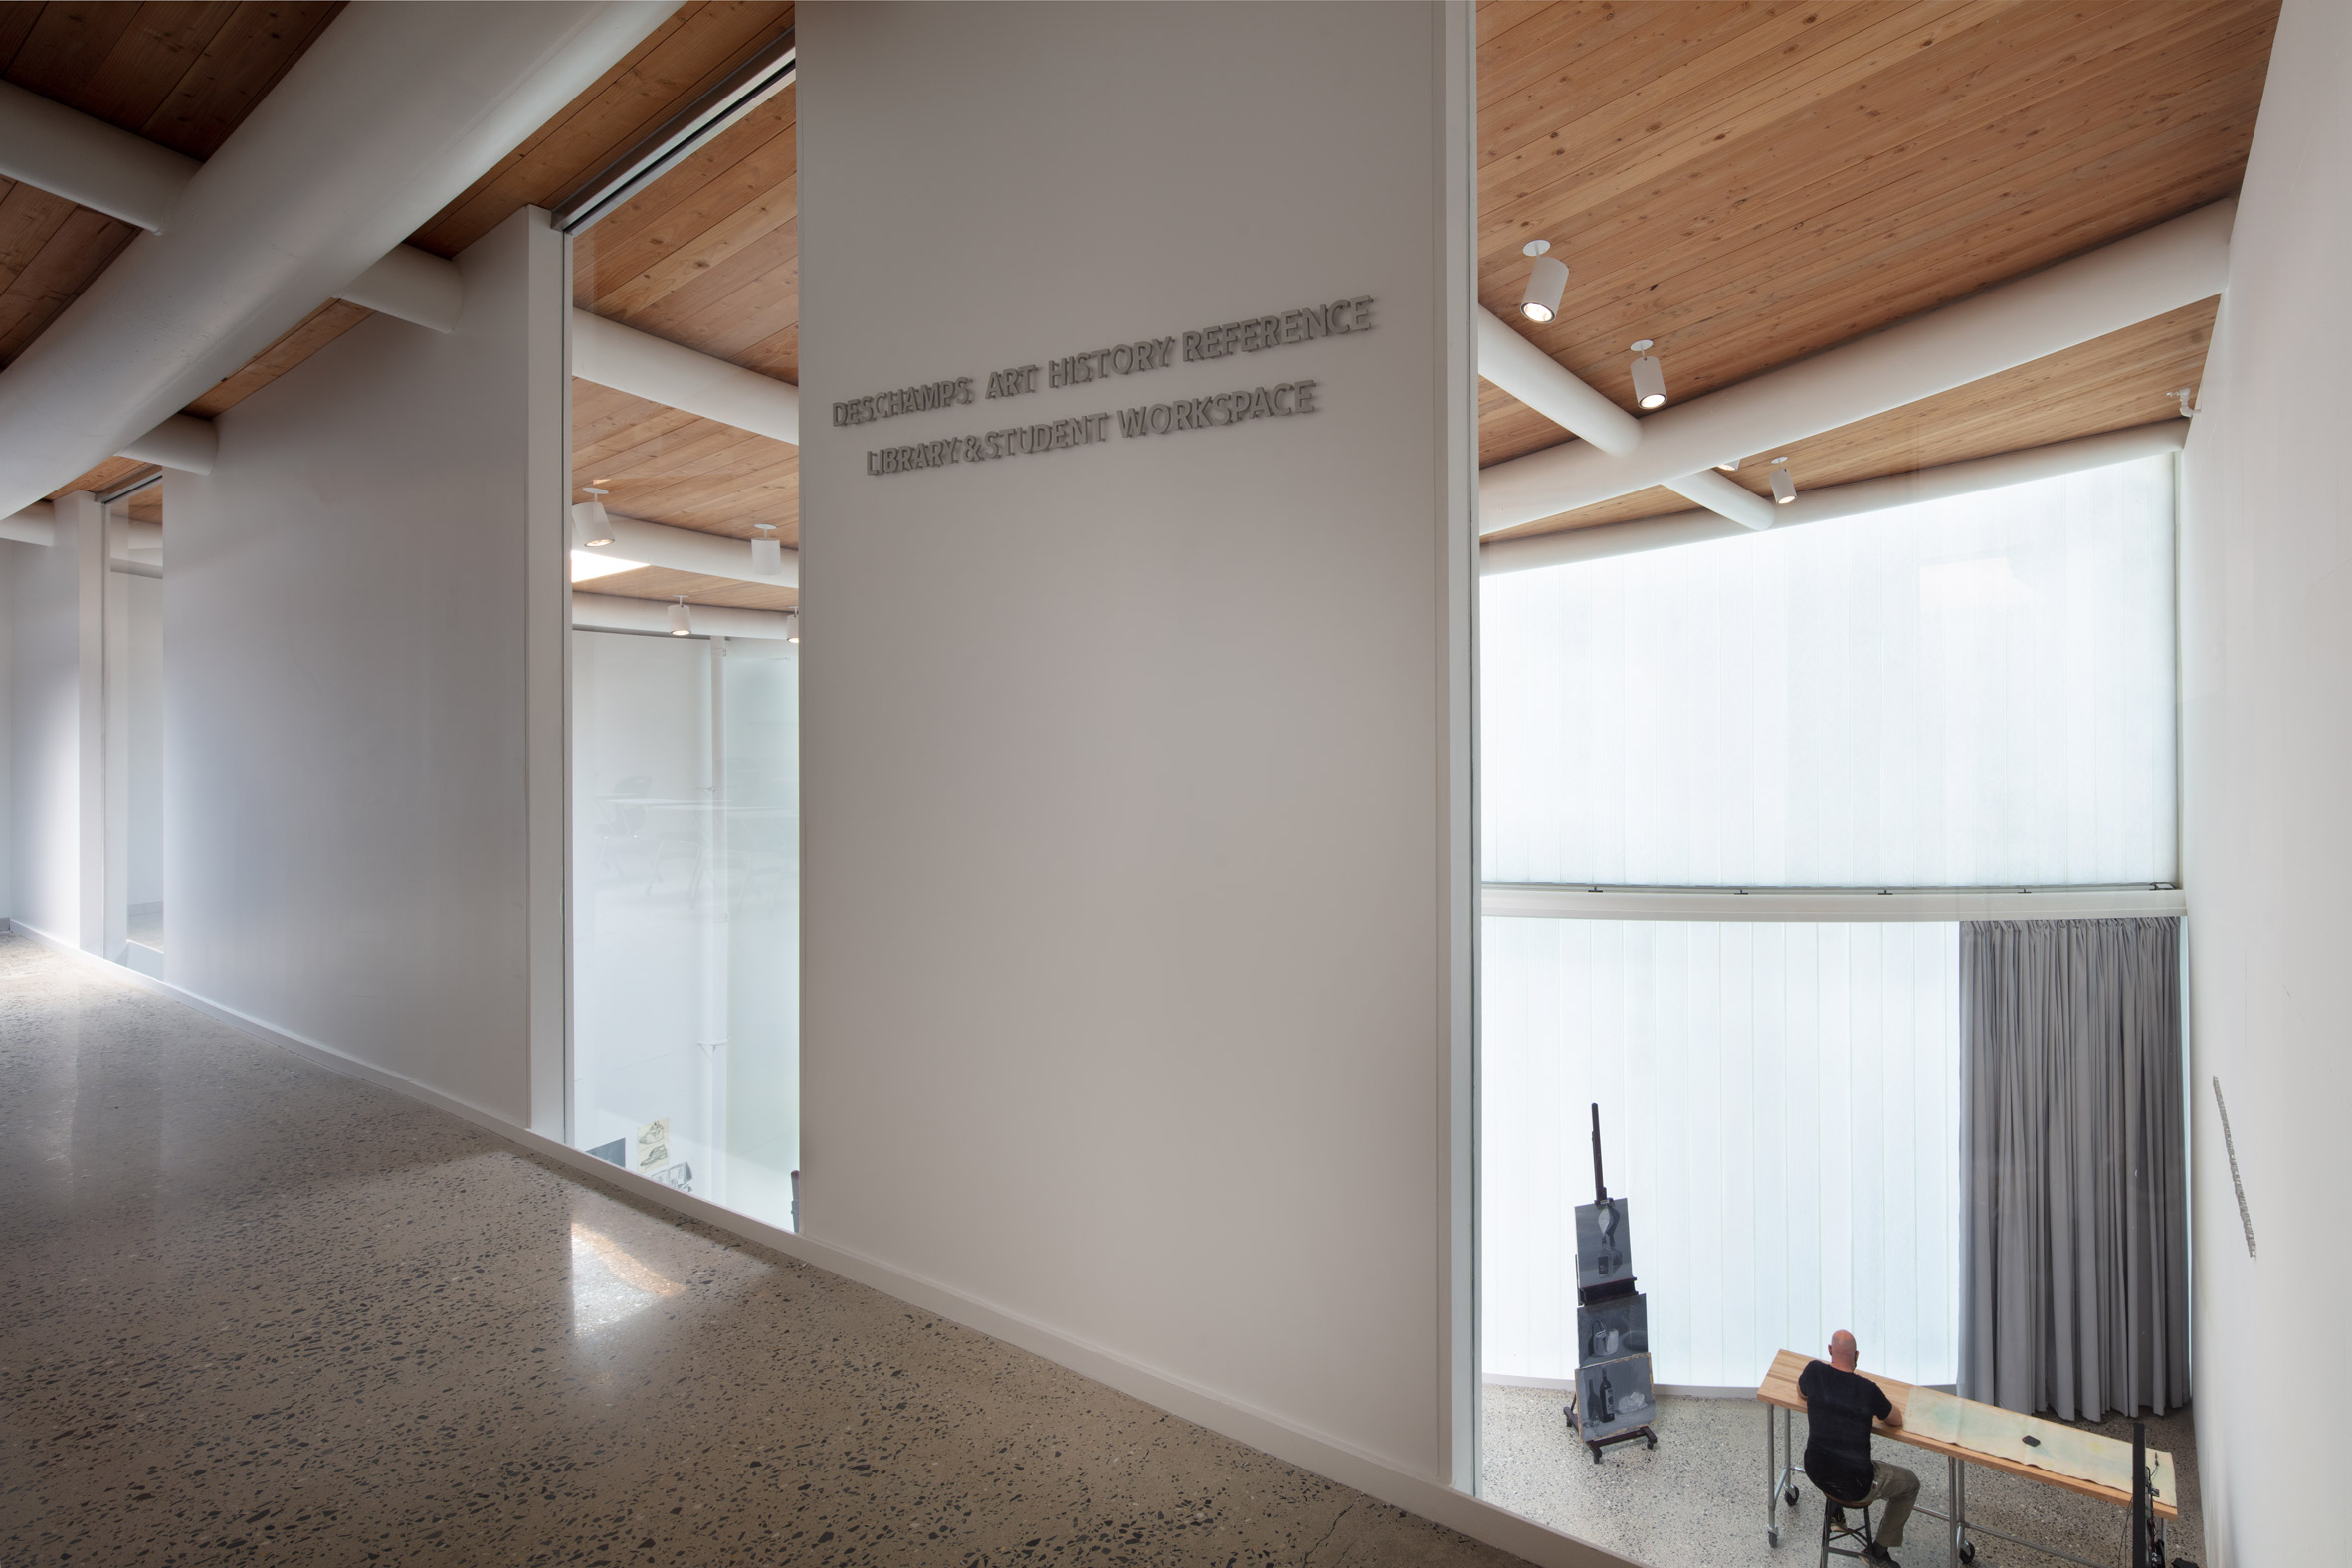 Inside Winter Visual Arts Building by Steven Holl Architects in Lancaster, Pennsylvania